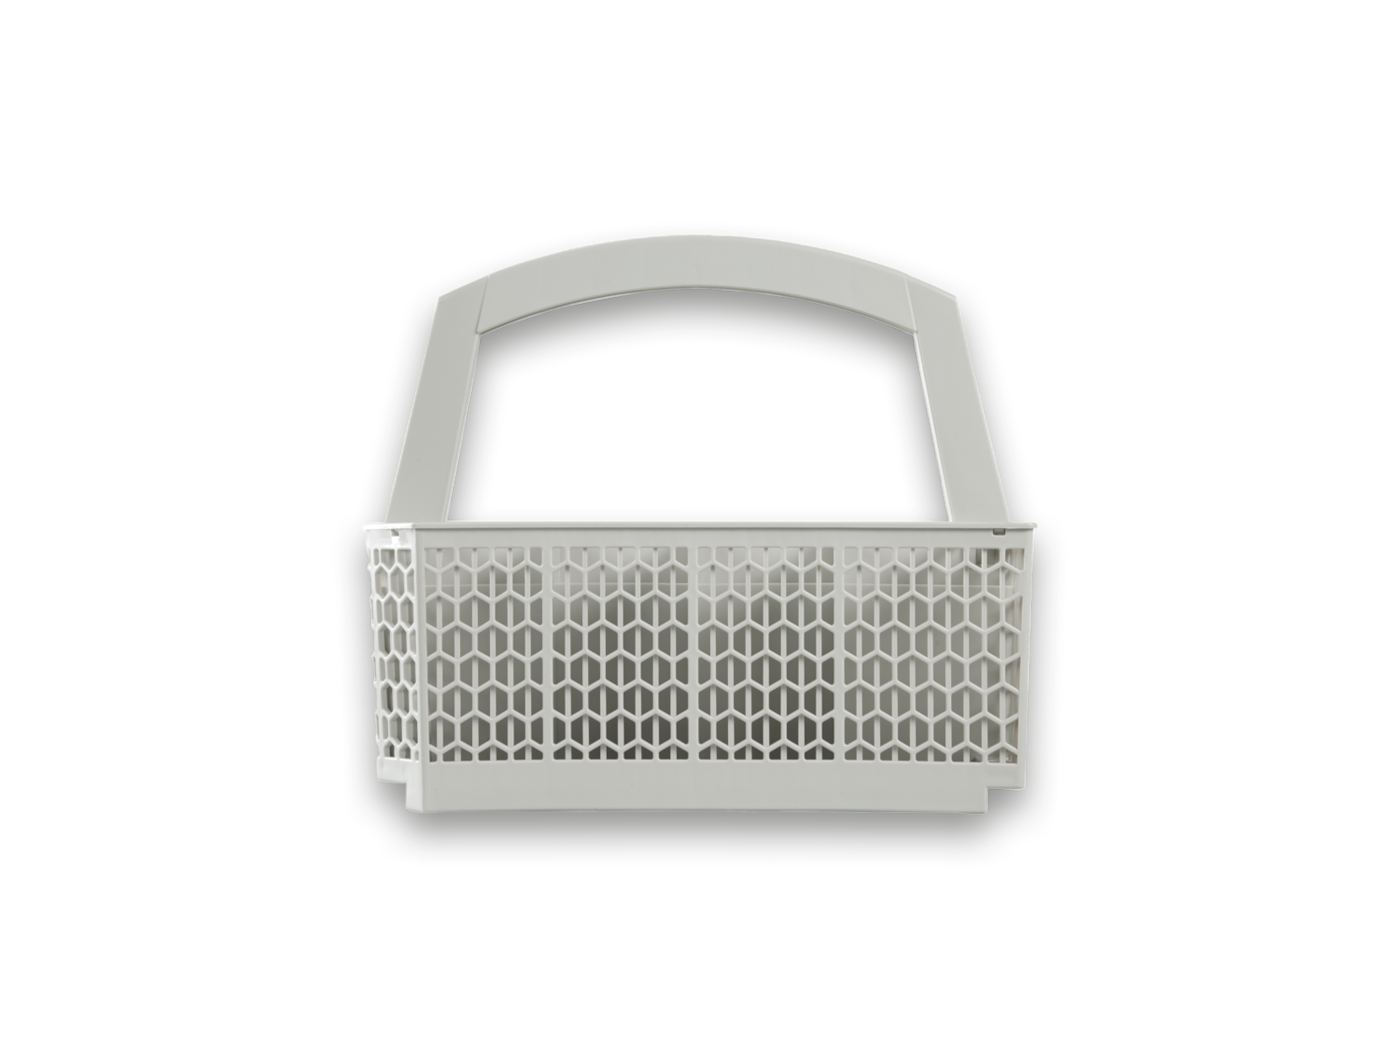 Miele Dishwasher Cutlery Basket - Spare Part 06024710 product photo